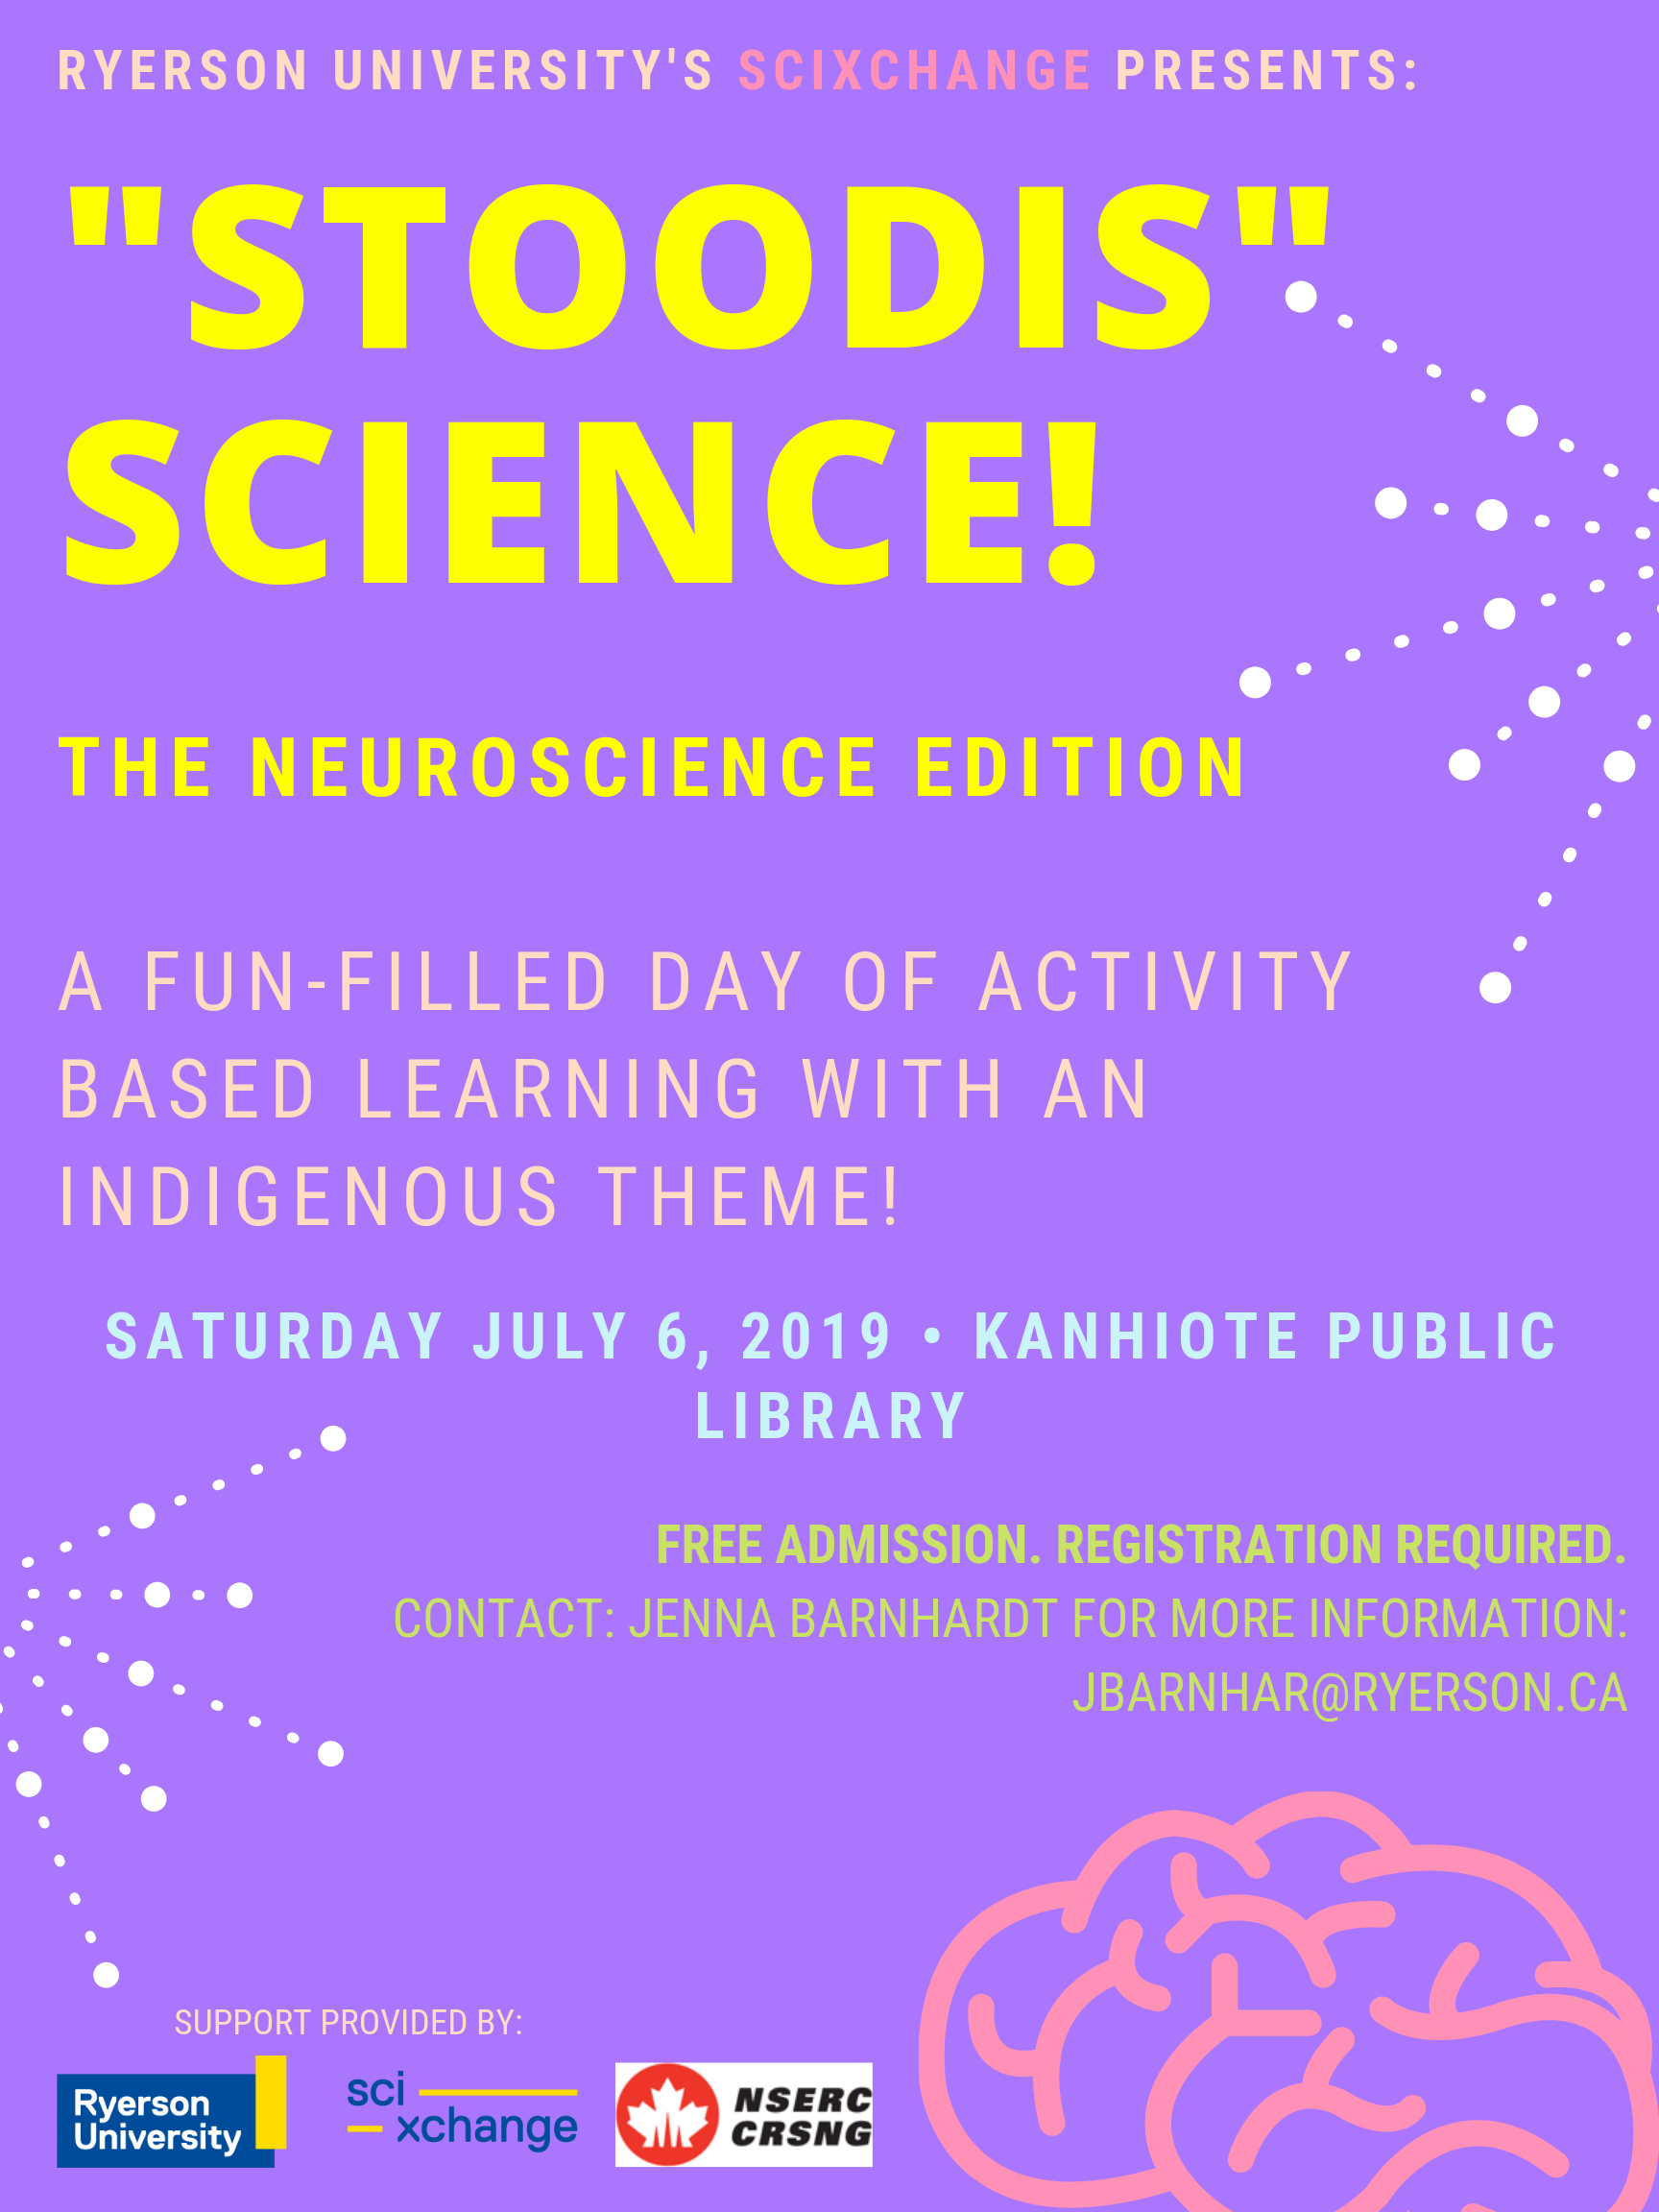 The poster used to advertise the first "Stoodis" Science event in 2019.